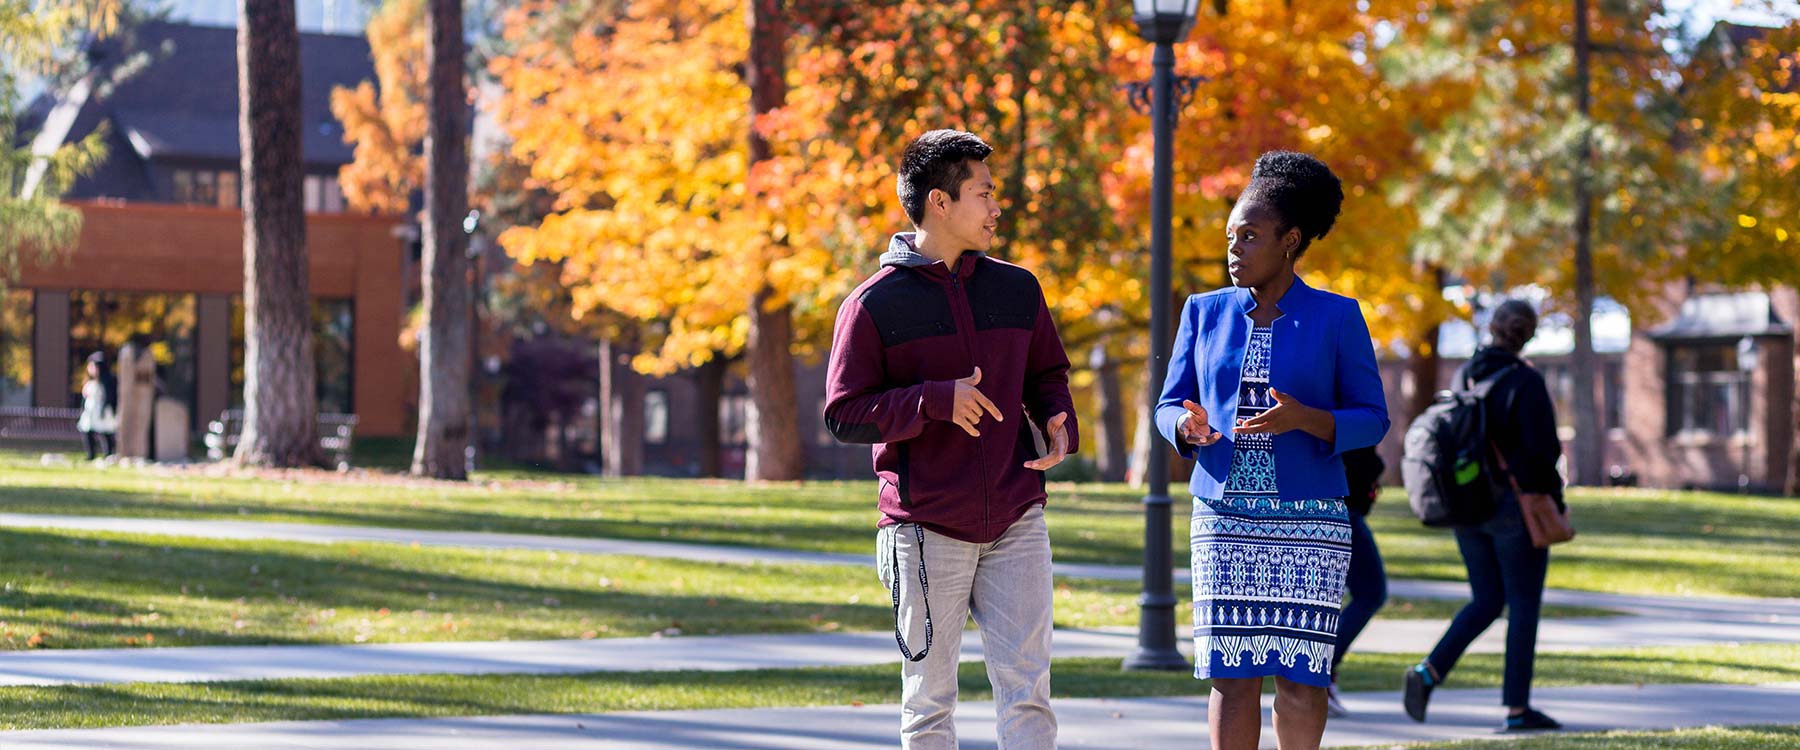 Professor Ndichu talks with a student while walking on campus. They turn toward each other talking.